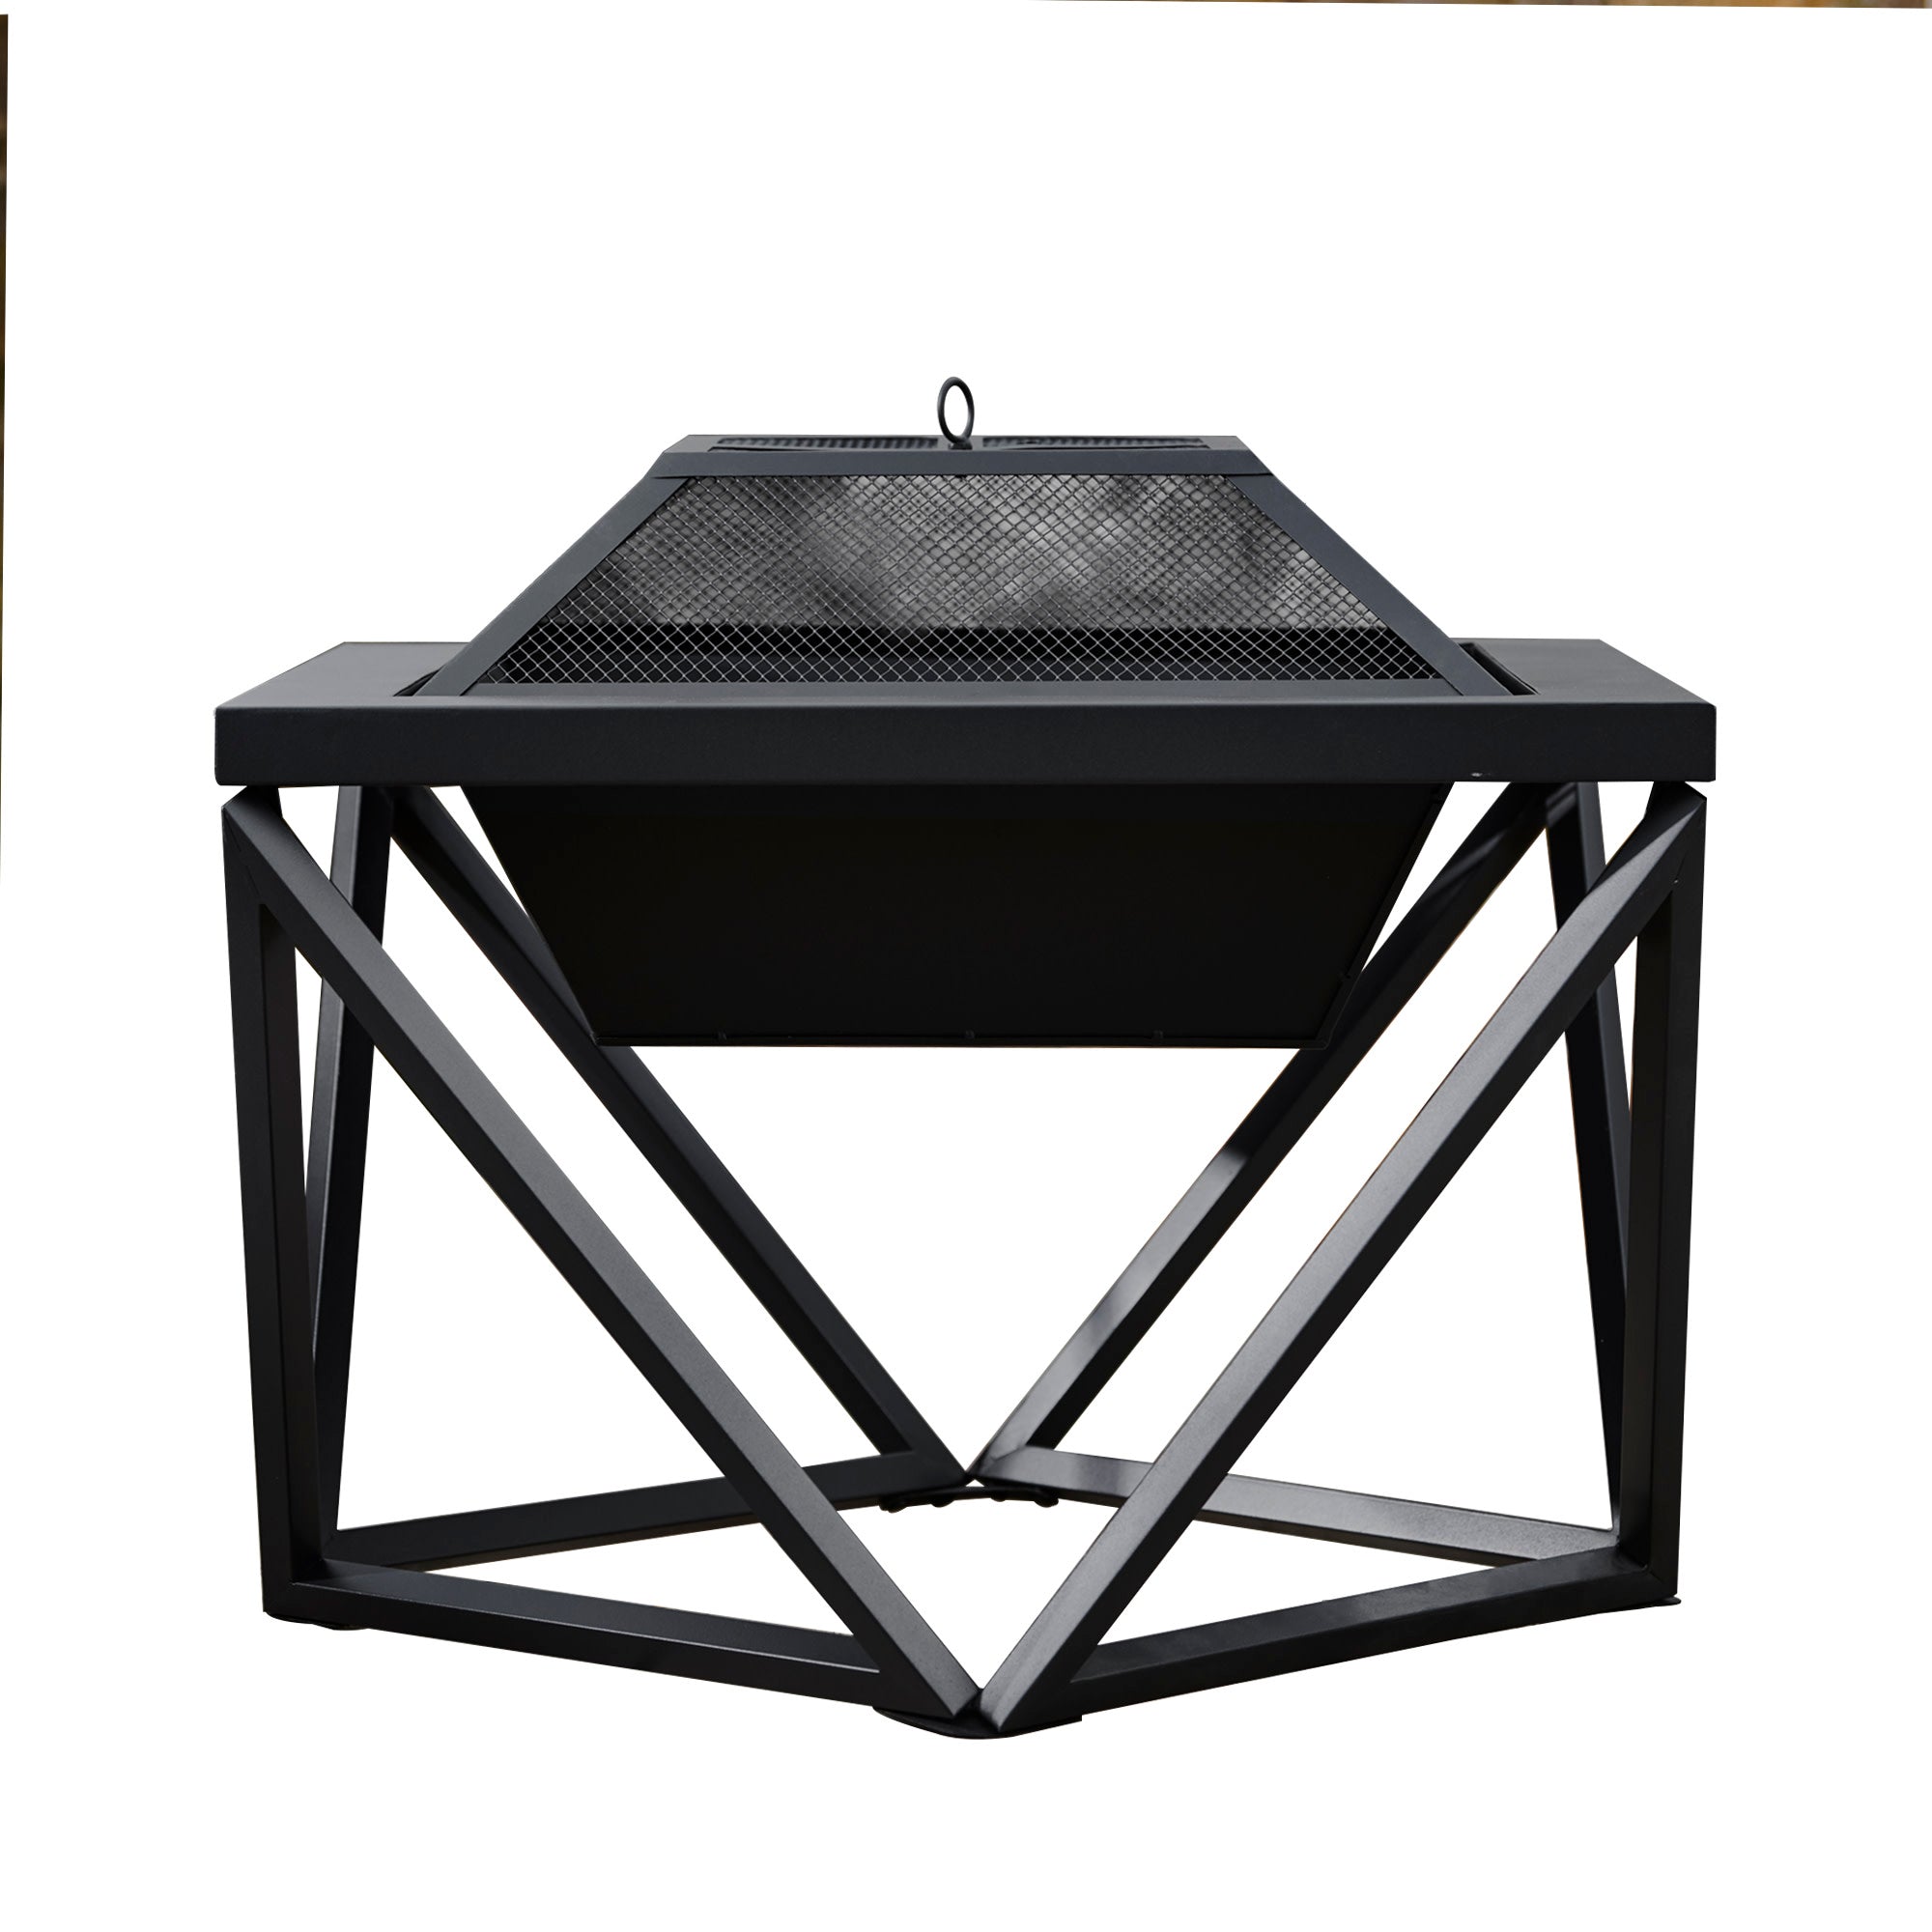 Teamson Home Outdoor 24" Wood Burning Fire Pit with Tabletop and Decorative Base, Black